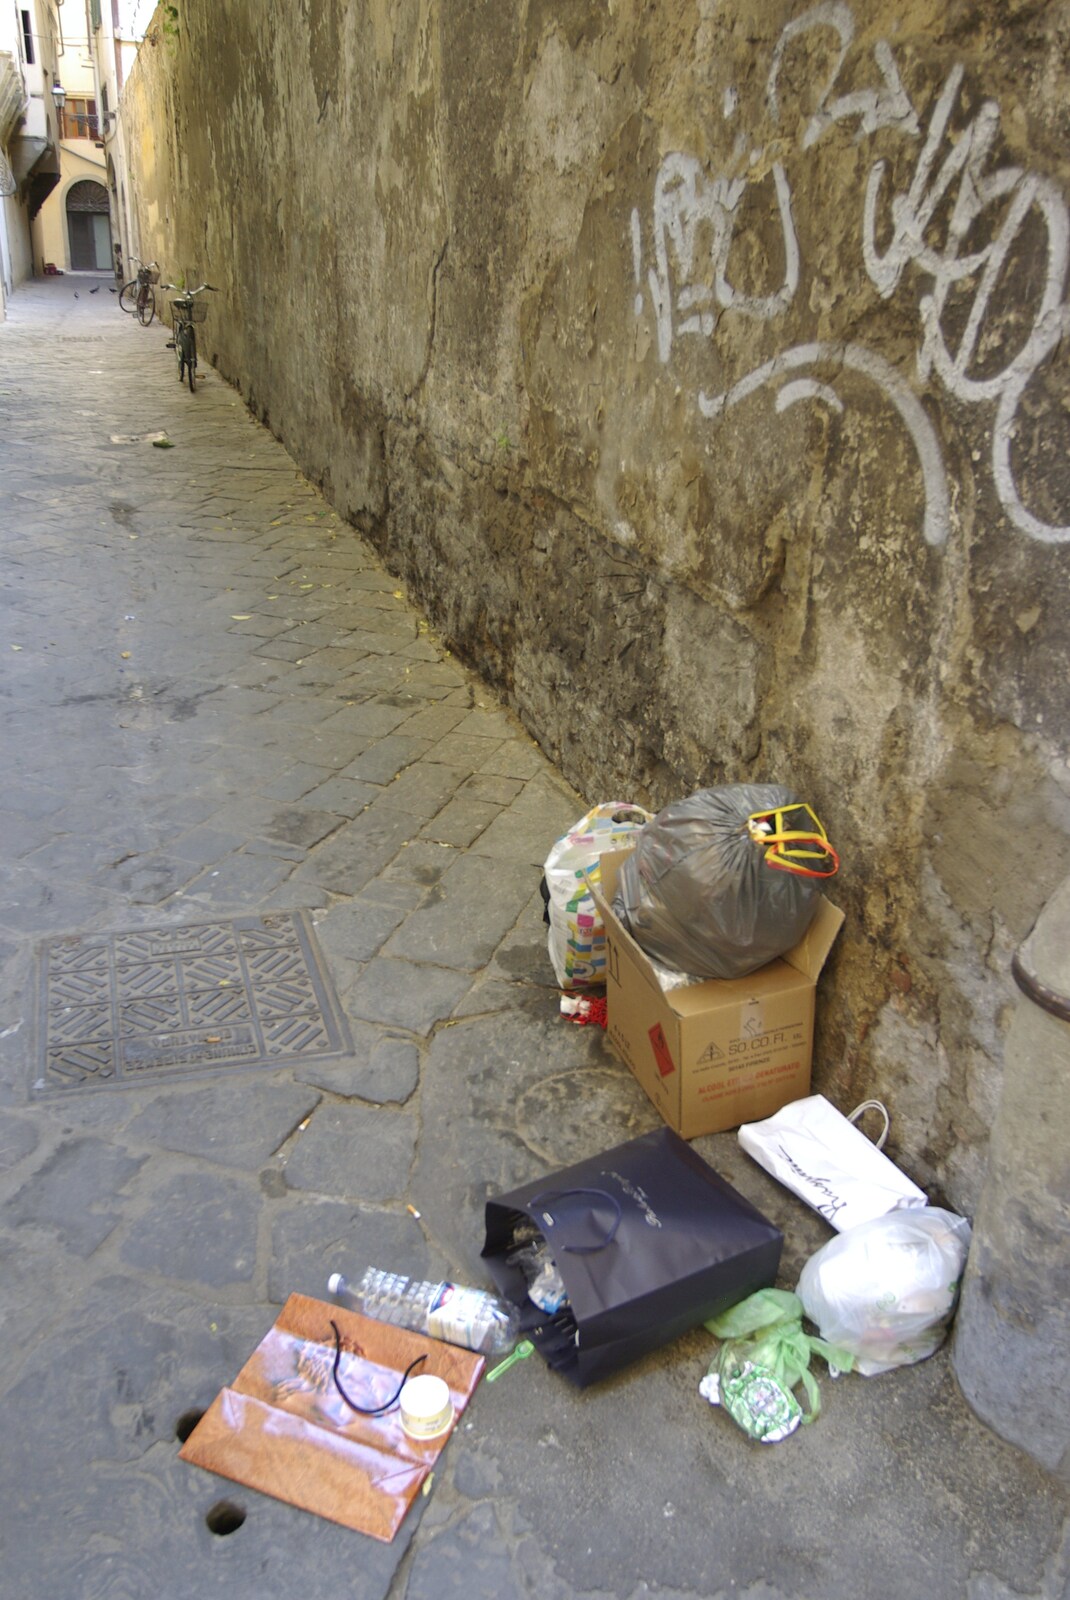 A Day Trip to Firenze, Tuscany, Italy - 24th July 2008: Discarded detritus